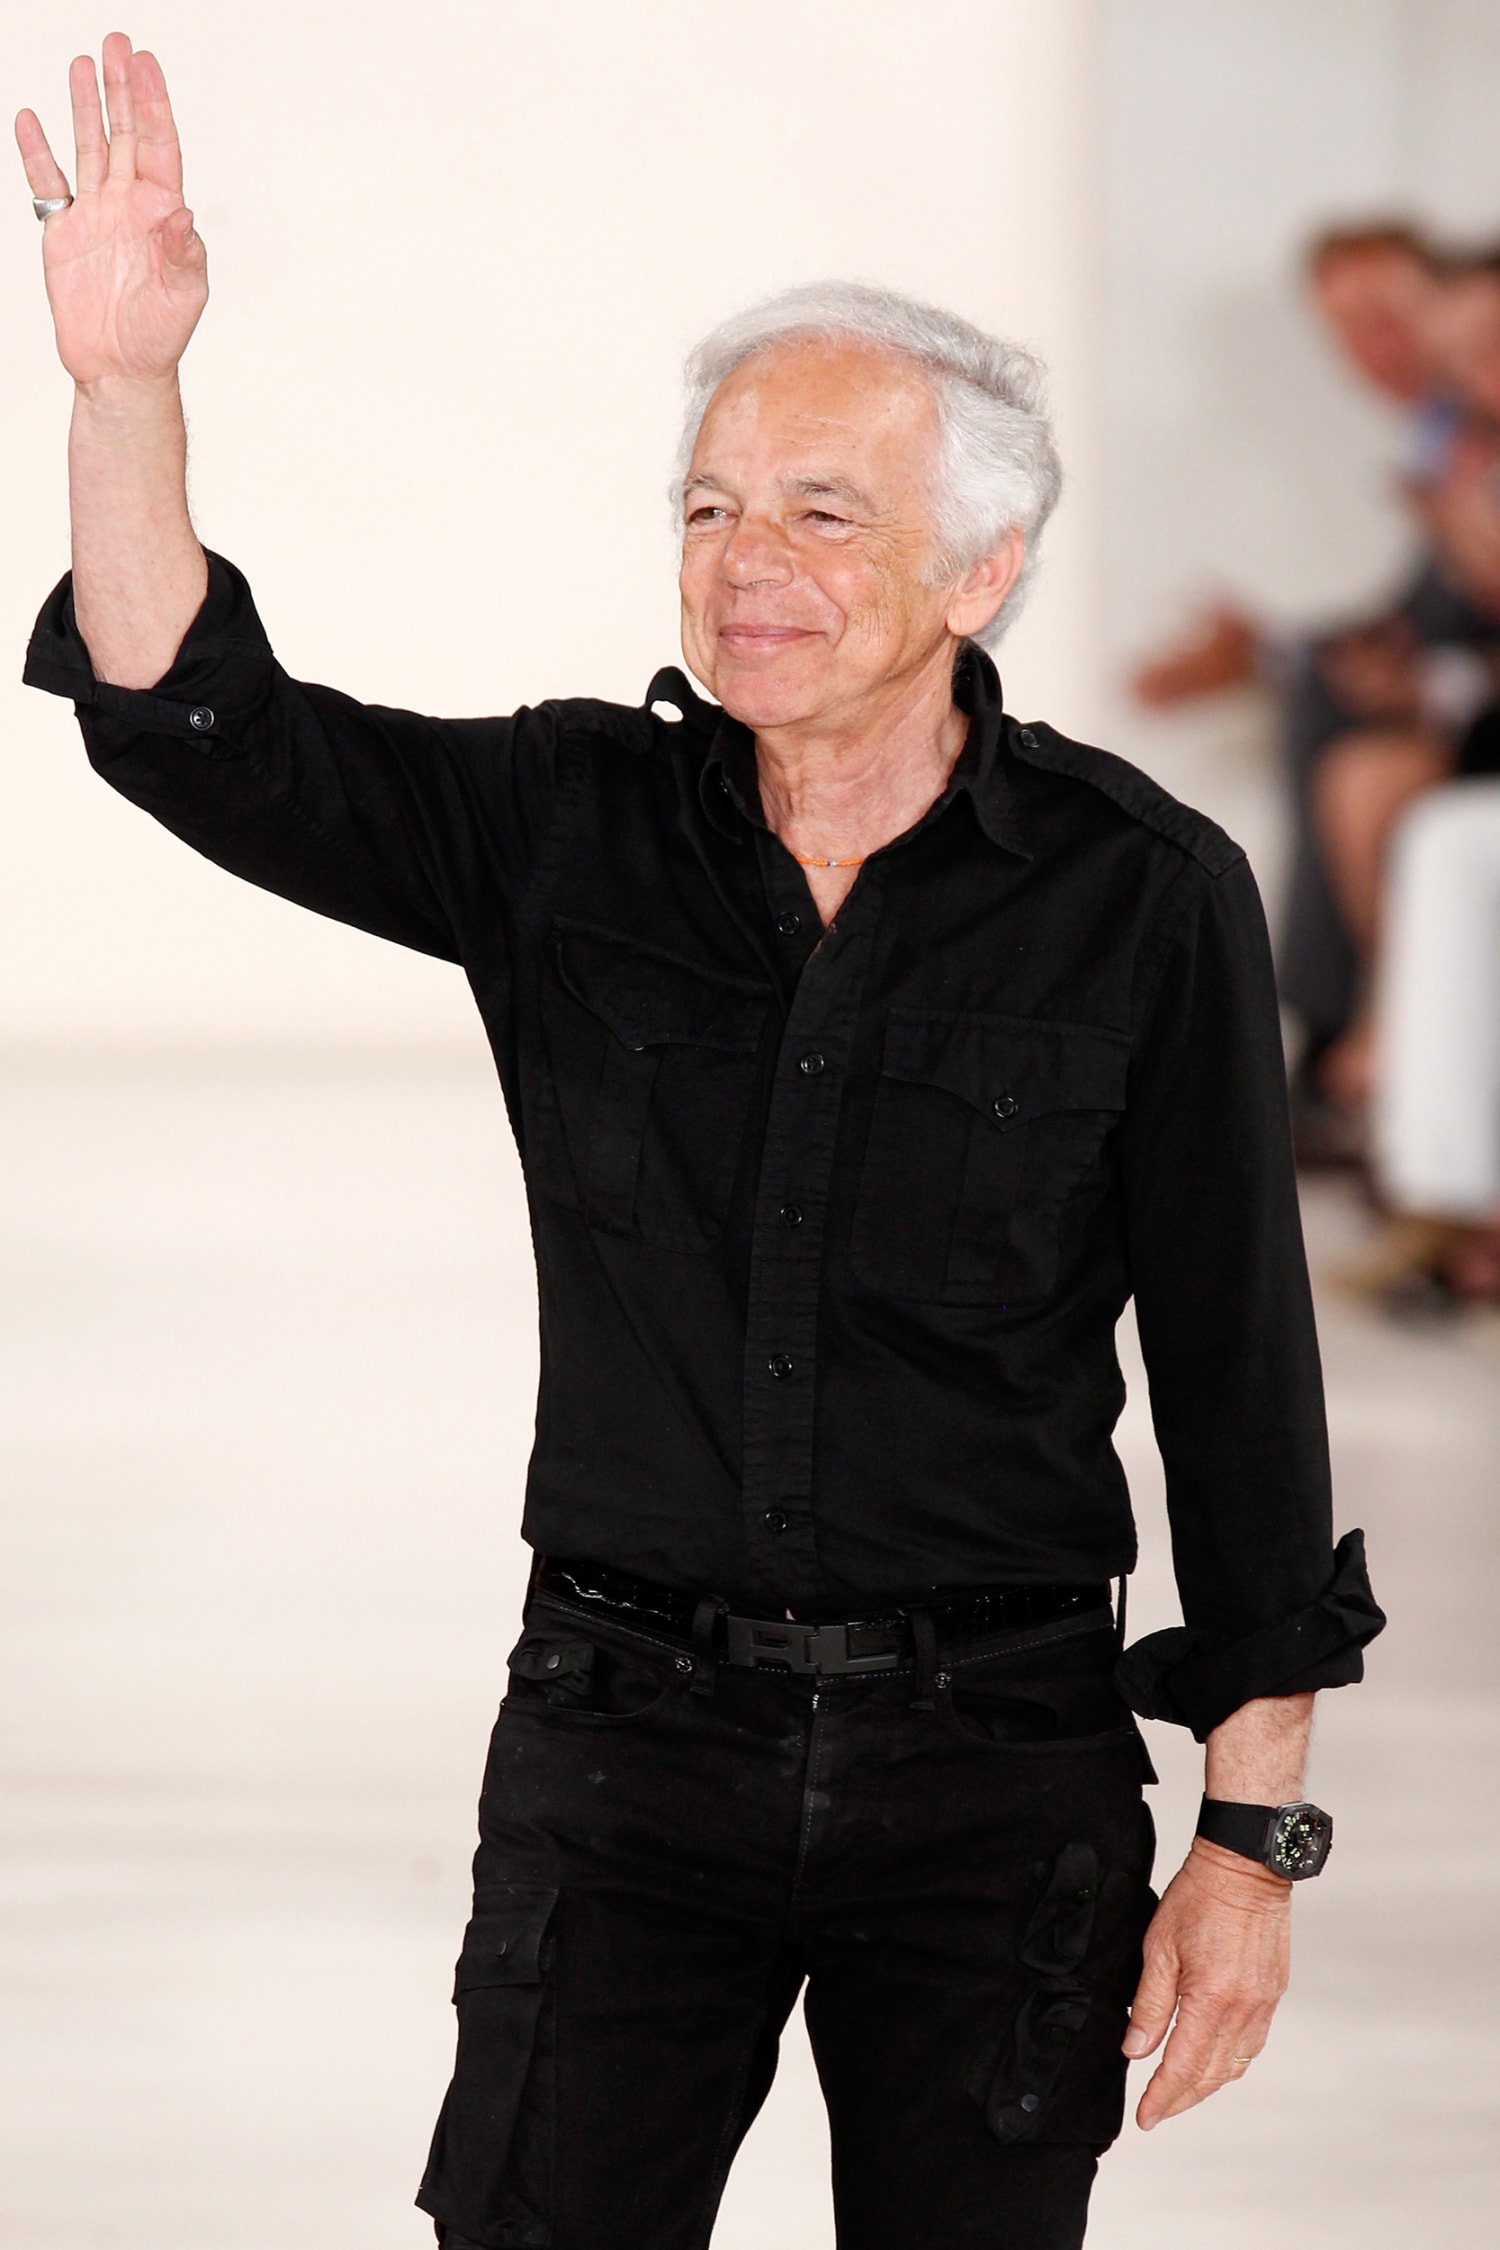 Ralph Lauren, Creator of Fashion Empire, Is Stepping Down as